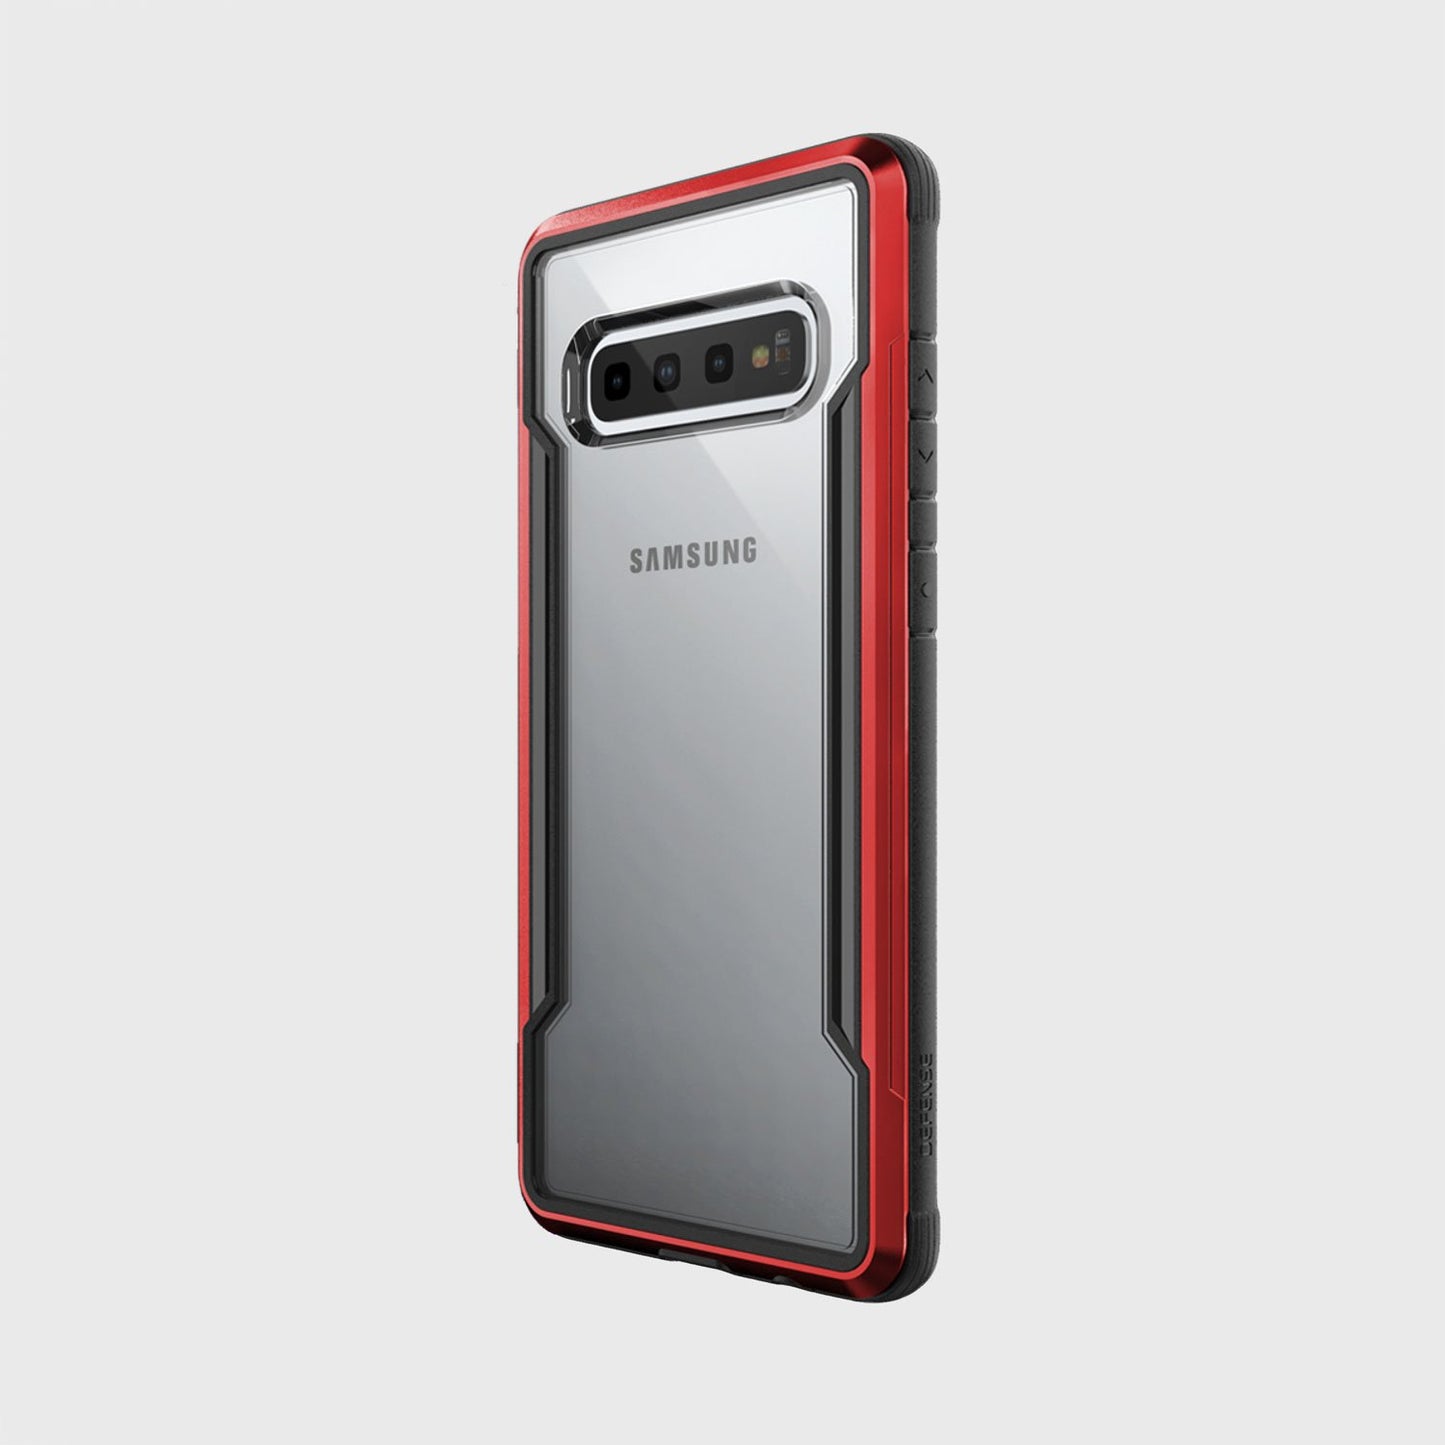 Protect your Samsung Galaxy S10 Plus with this stylish and durable X-Doria phone case, the Raptic Shield Red. Designed for drop protection, it safeguards your device while adding a touch of elegance.